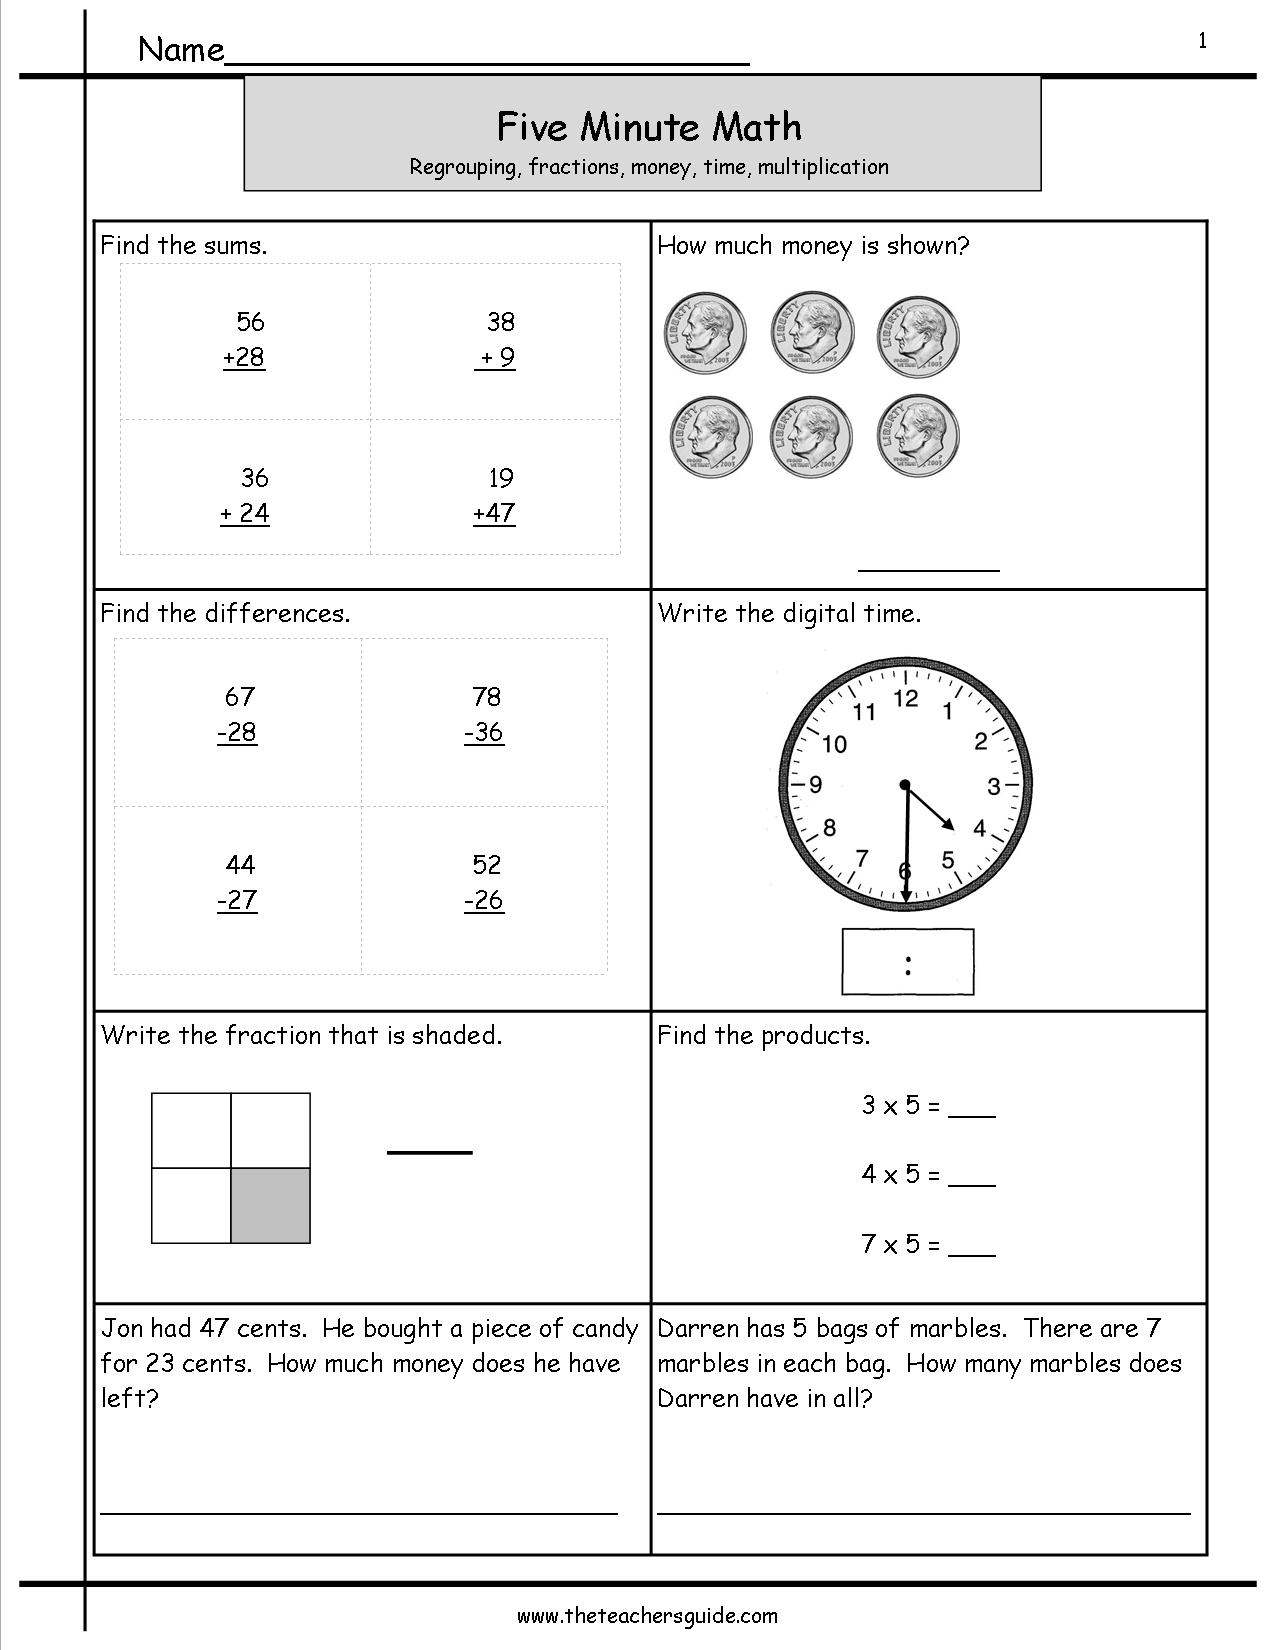 Five Minute Math Review Worksheets From The Teacher s Guide